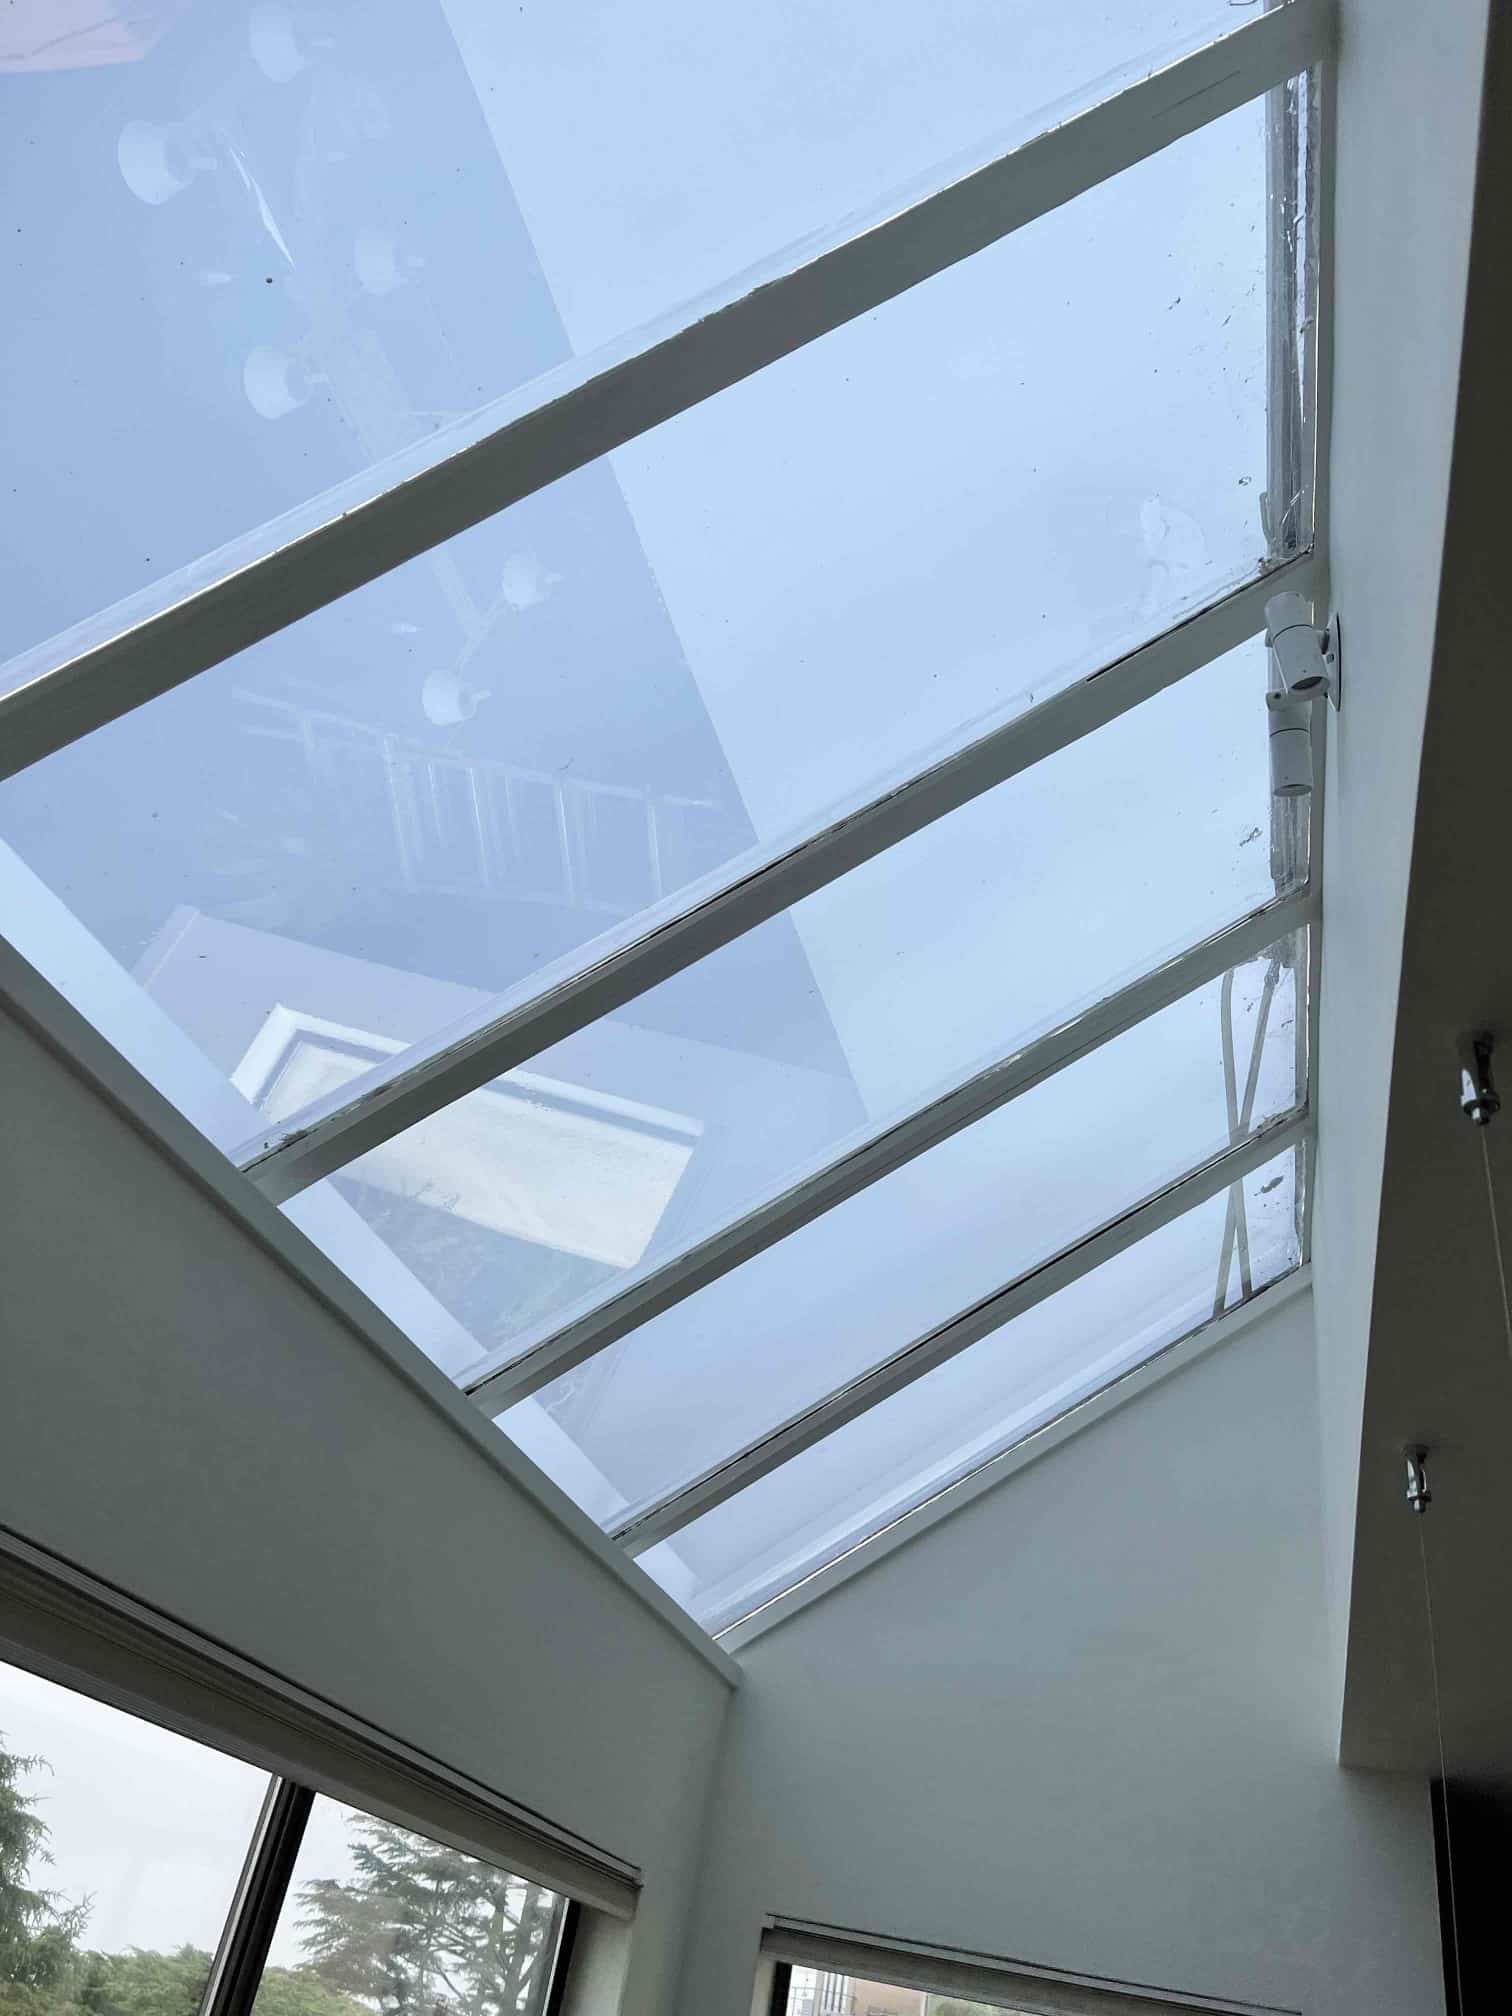 4 Skylight Window FIlm Projects Every Homeowner Should See